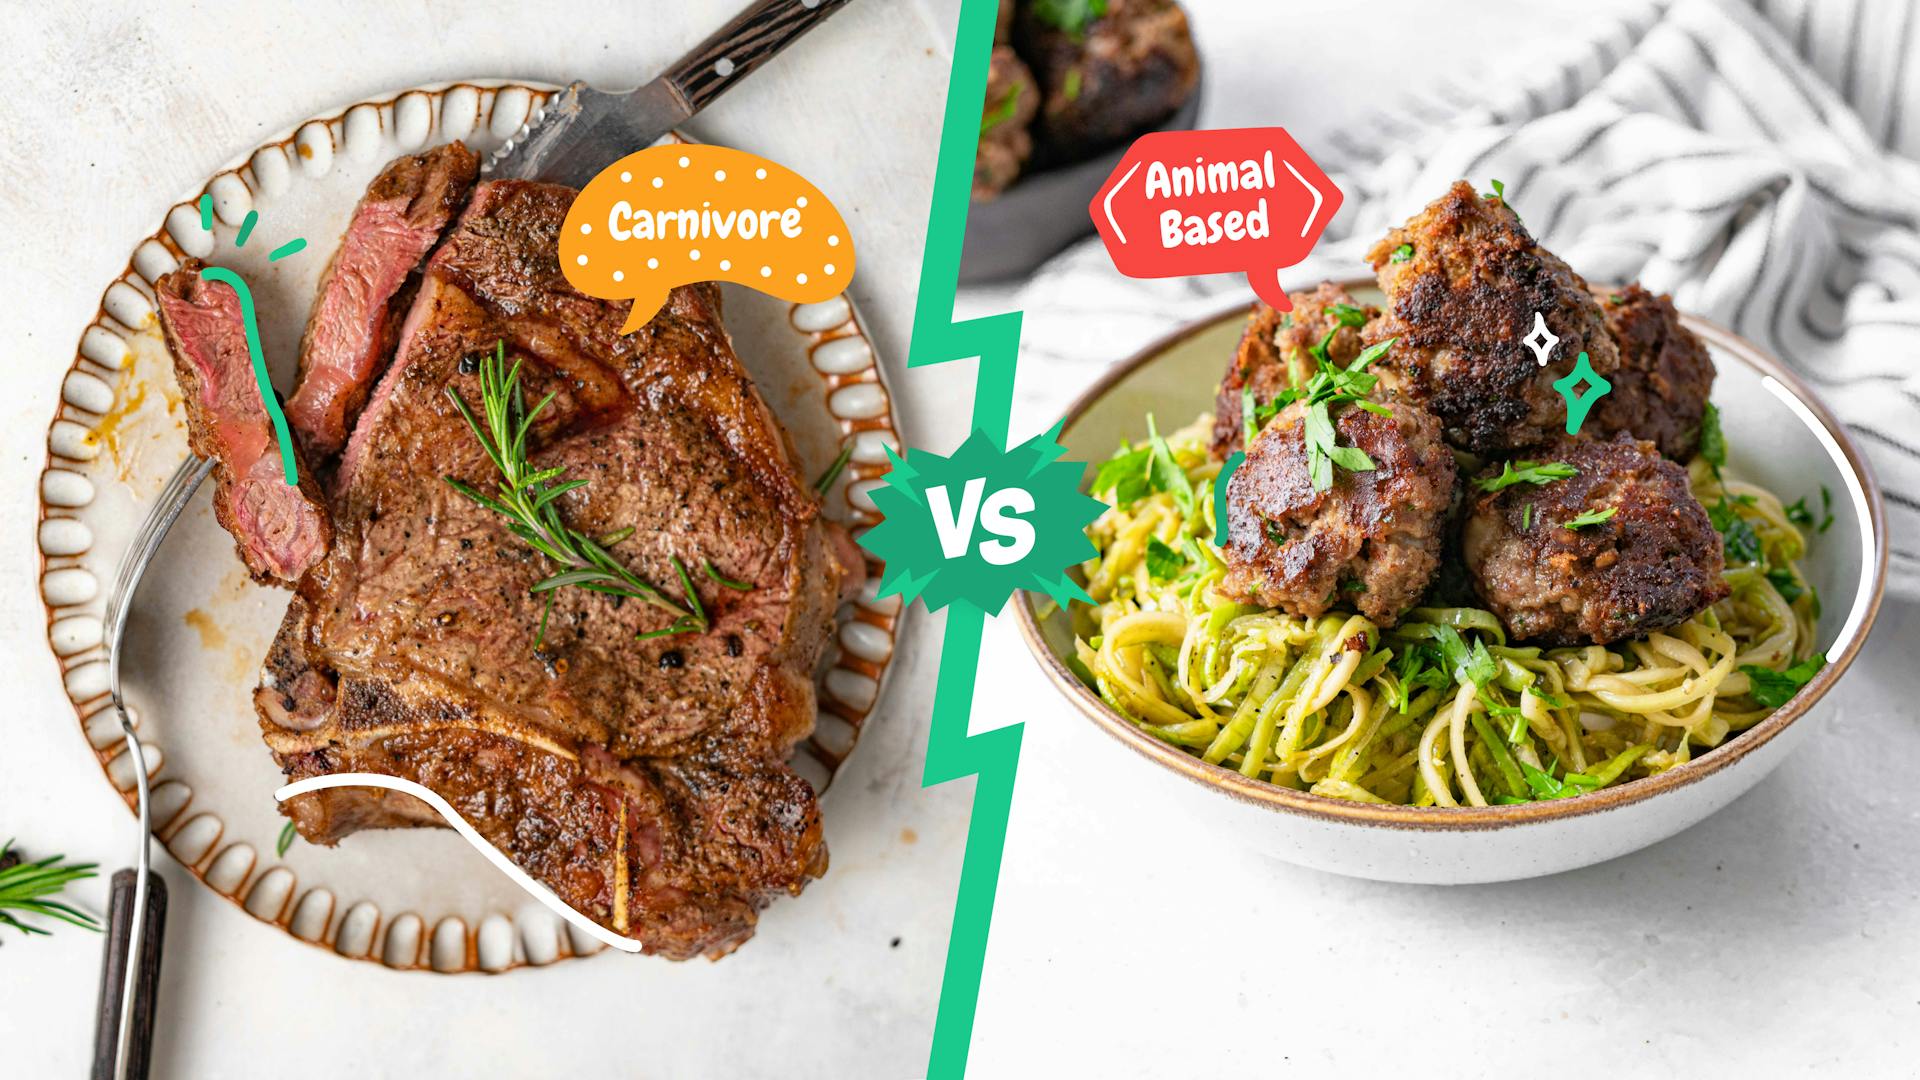 Carnivore vs. Animal-Based: What’s the Difference?